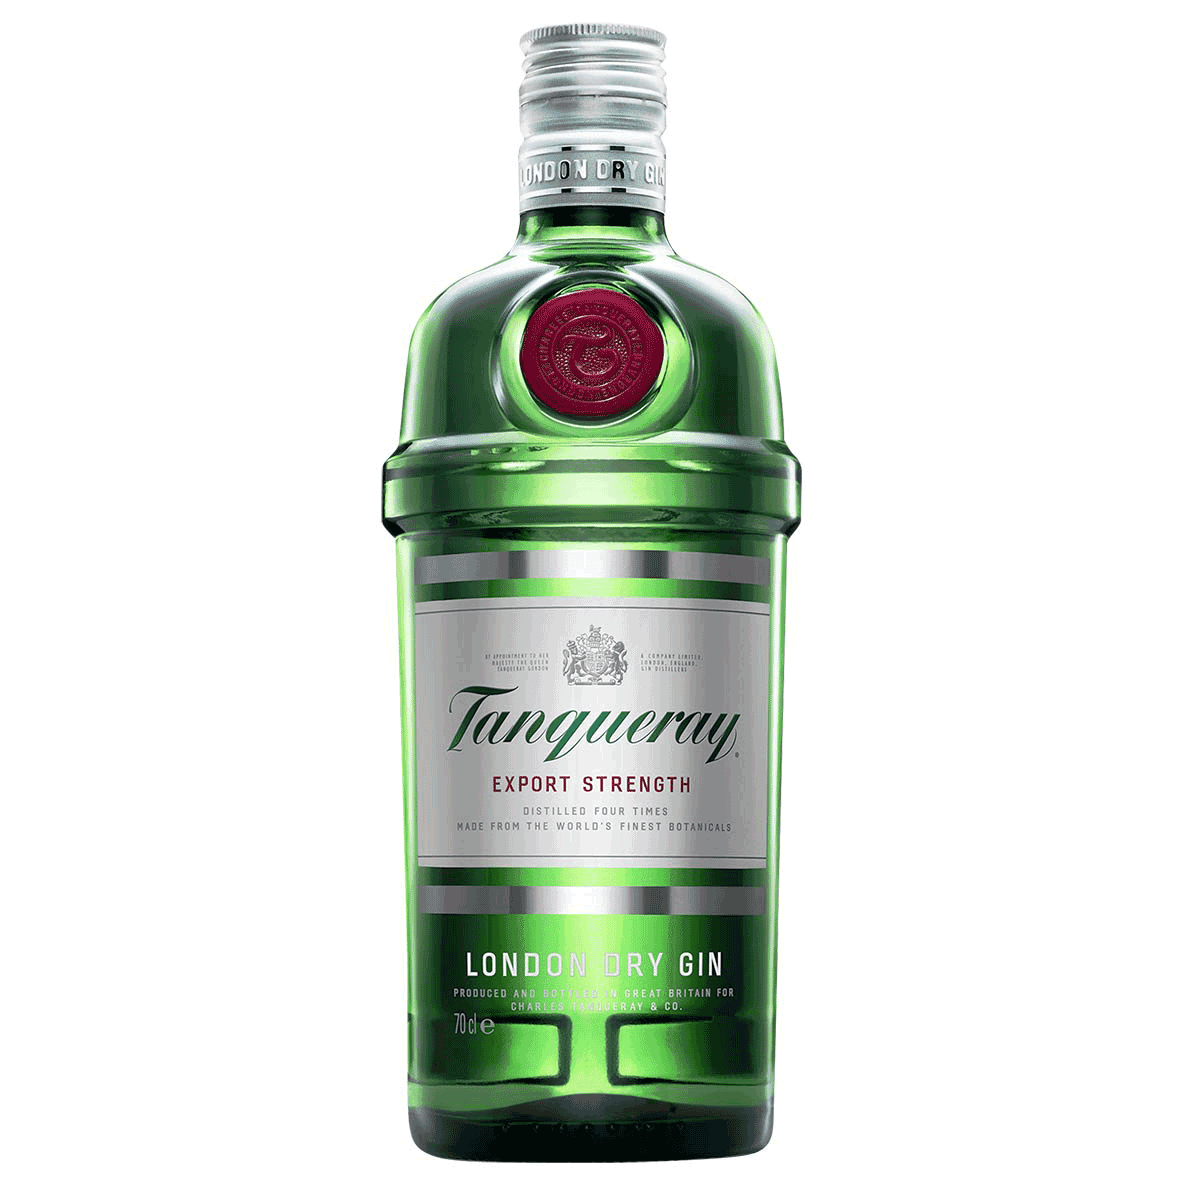 Tanqueray London dry gin 700ml - Andwell Brewery